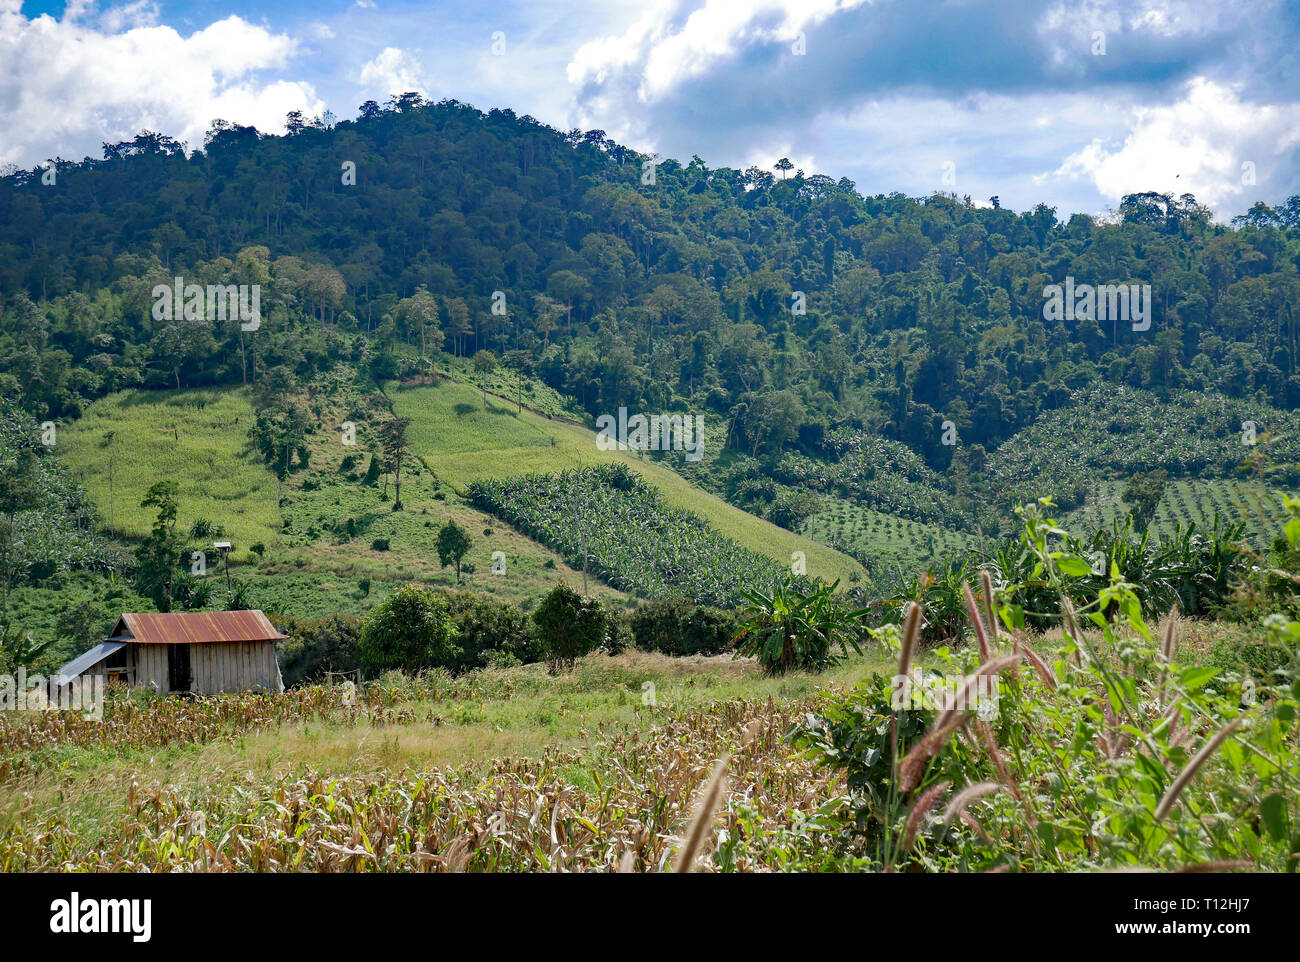 Pailin, Cambodia. A tropical forest on the side of a hill with farmland and crops on the lower slopes. Lush green vegetation and a small house. Stock Photo